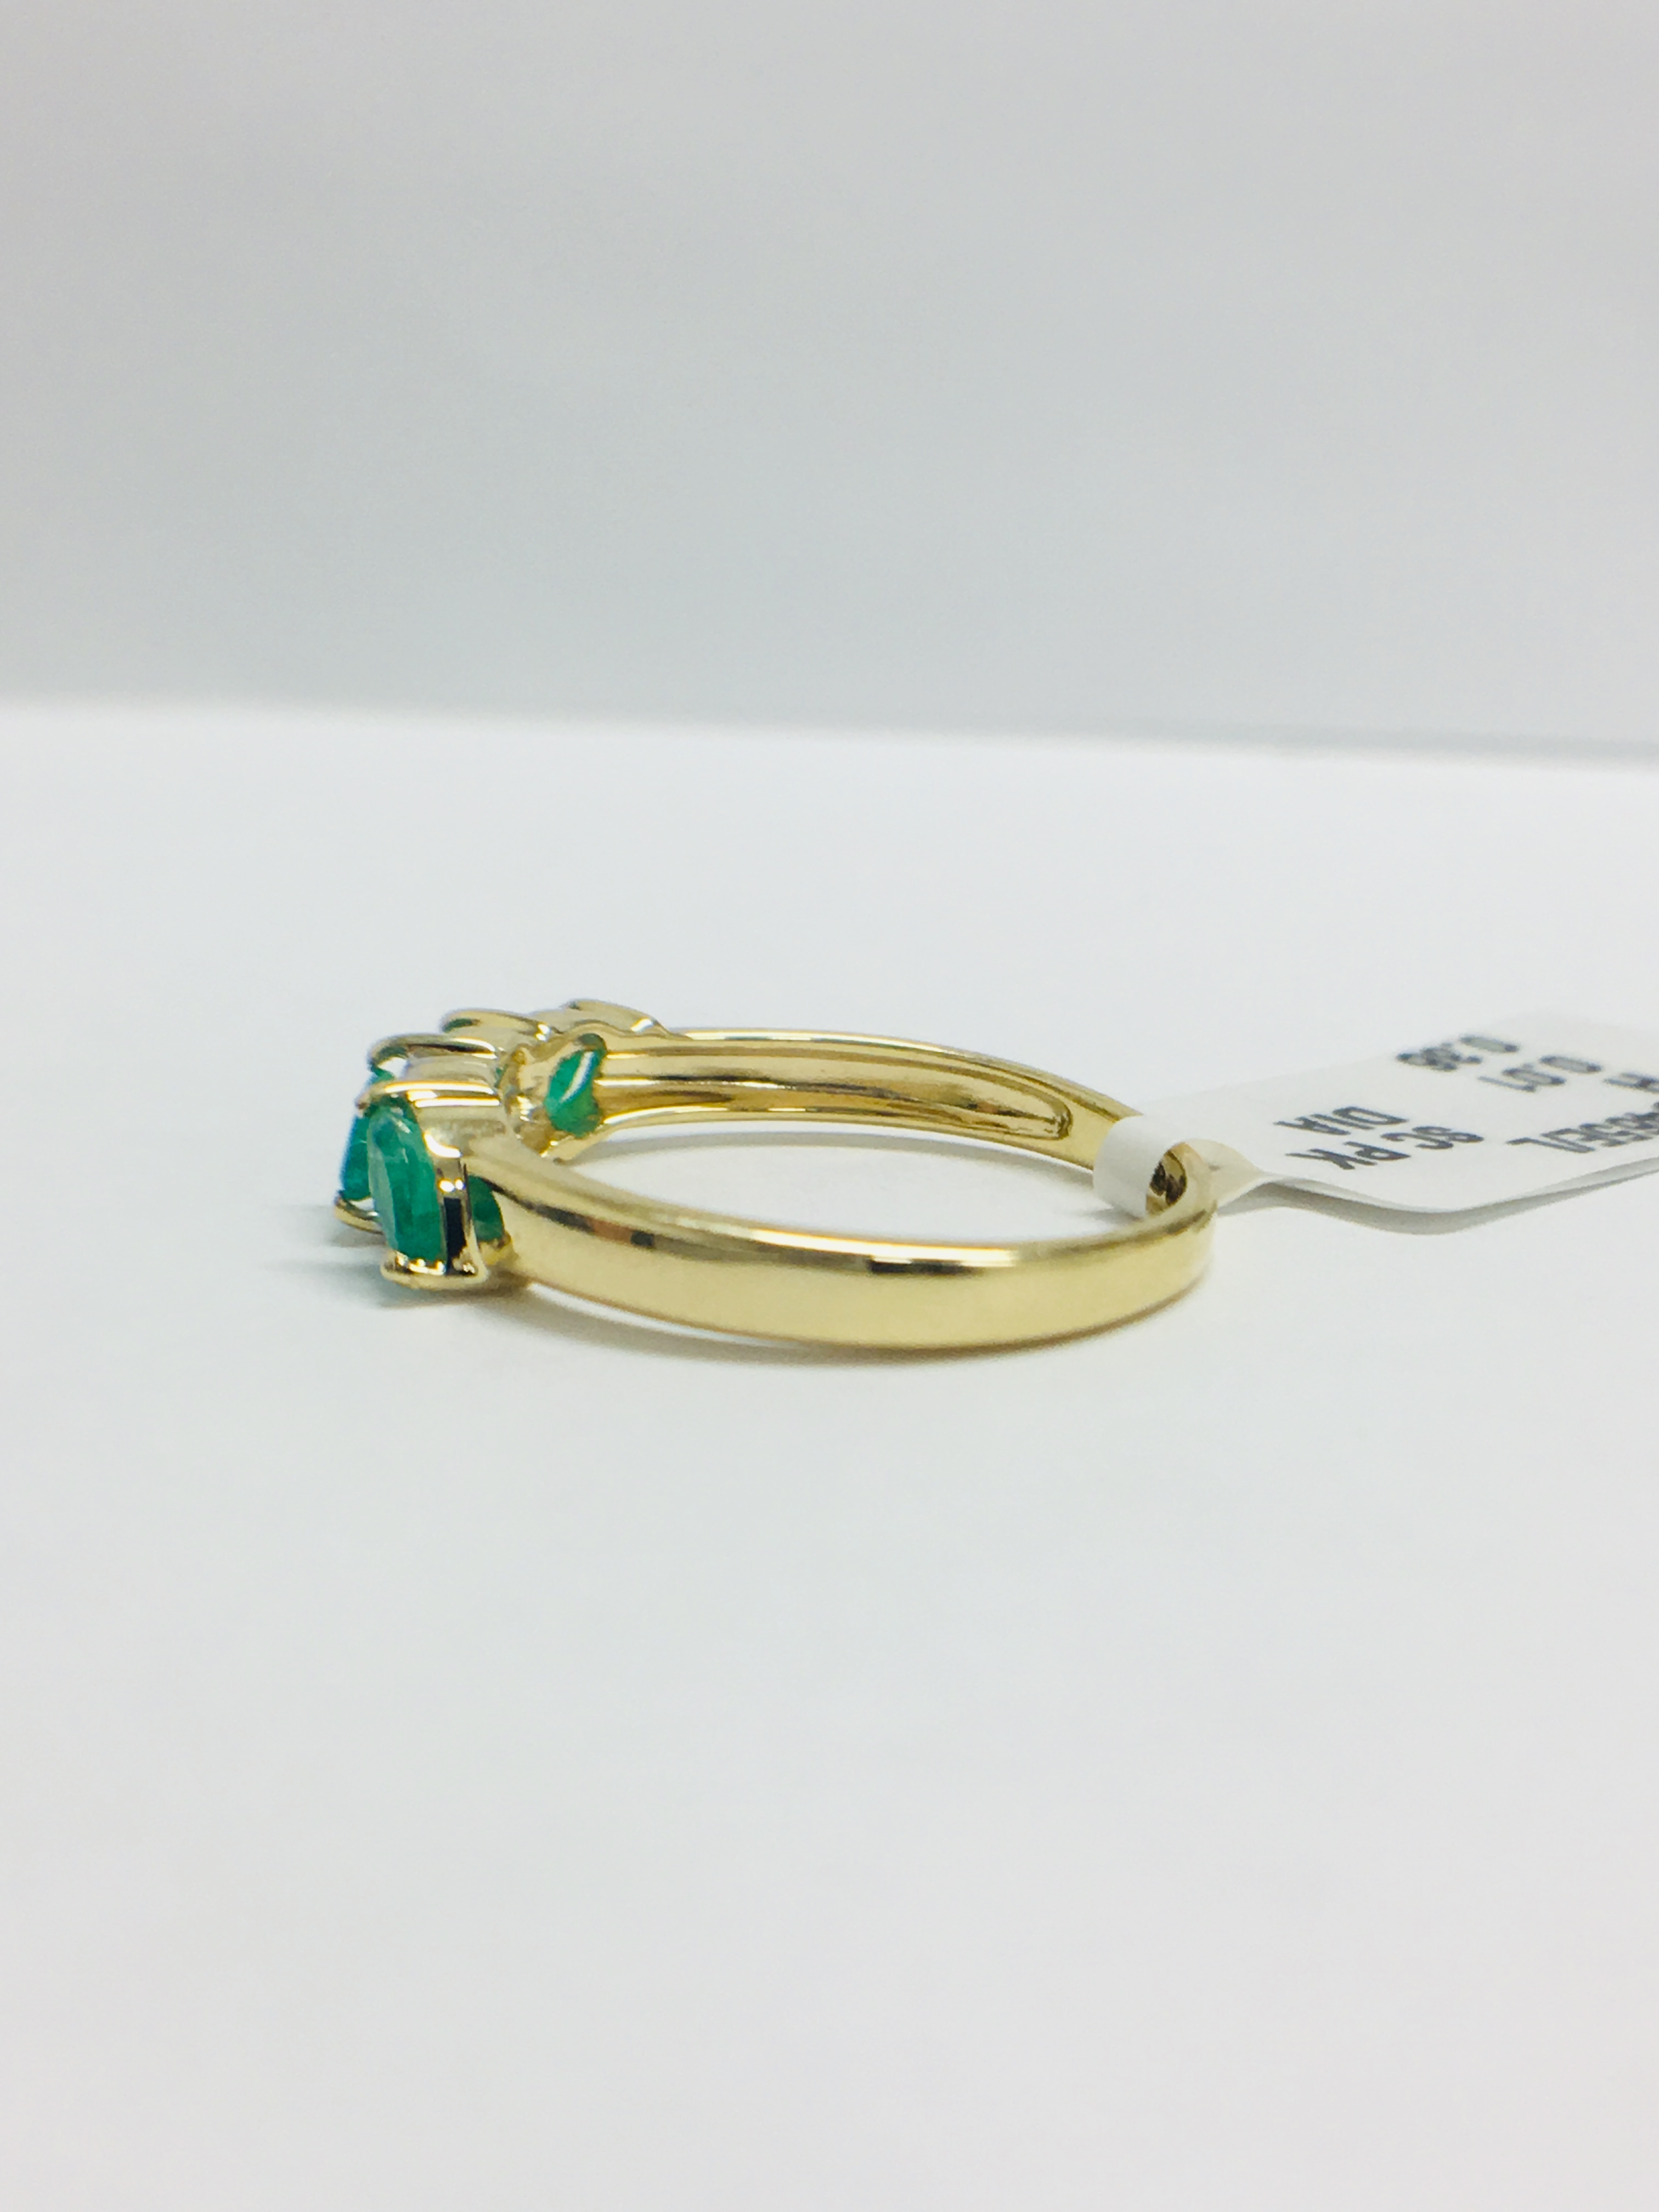 9ct yellow gold emerald and diamond ring - Image 5 of 11